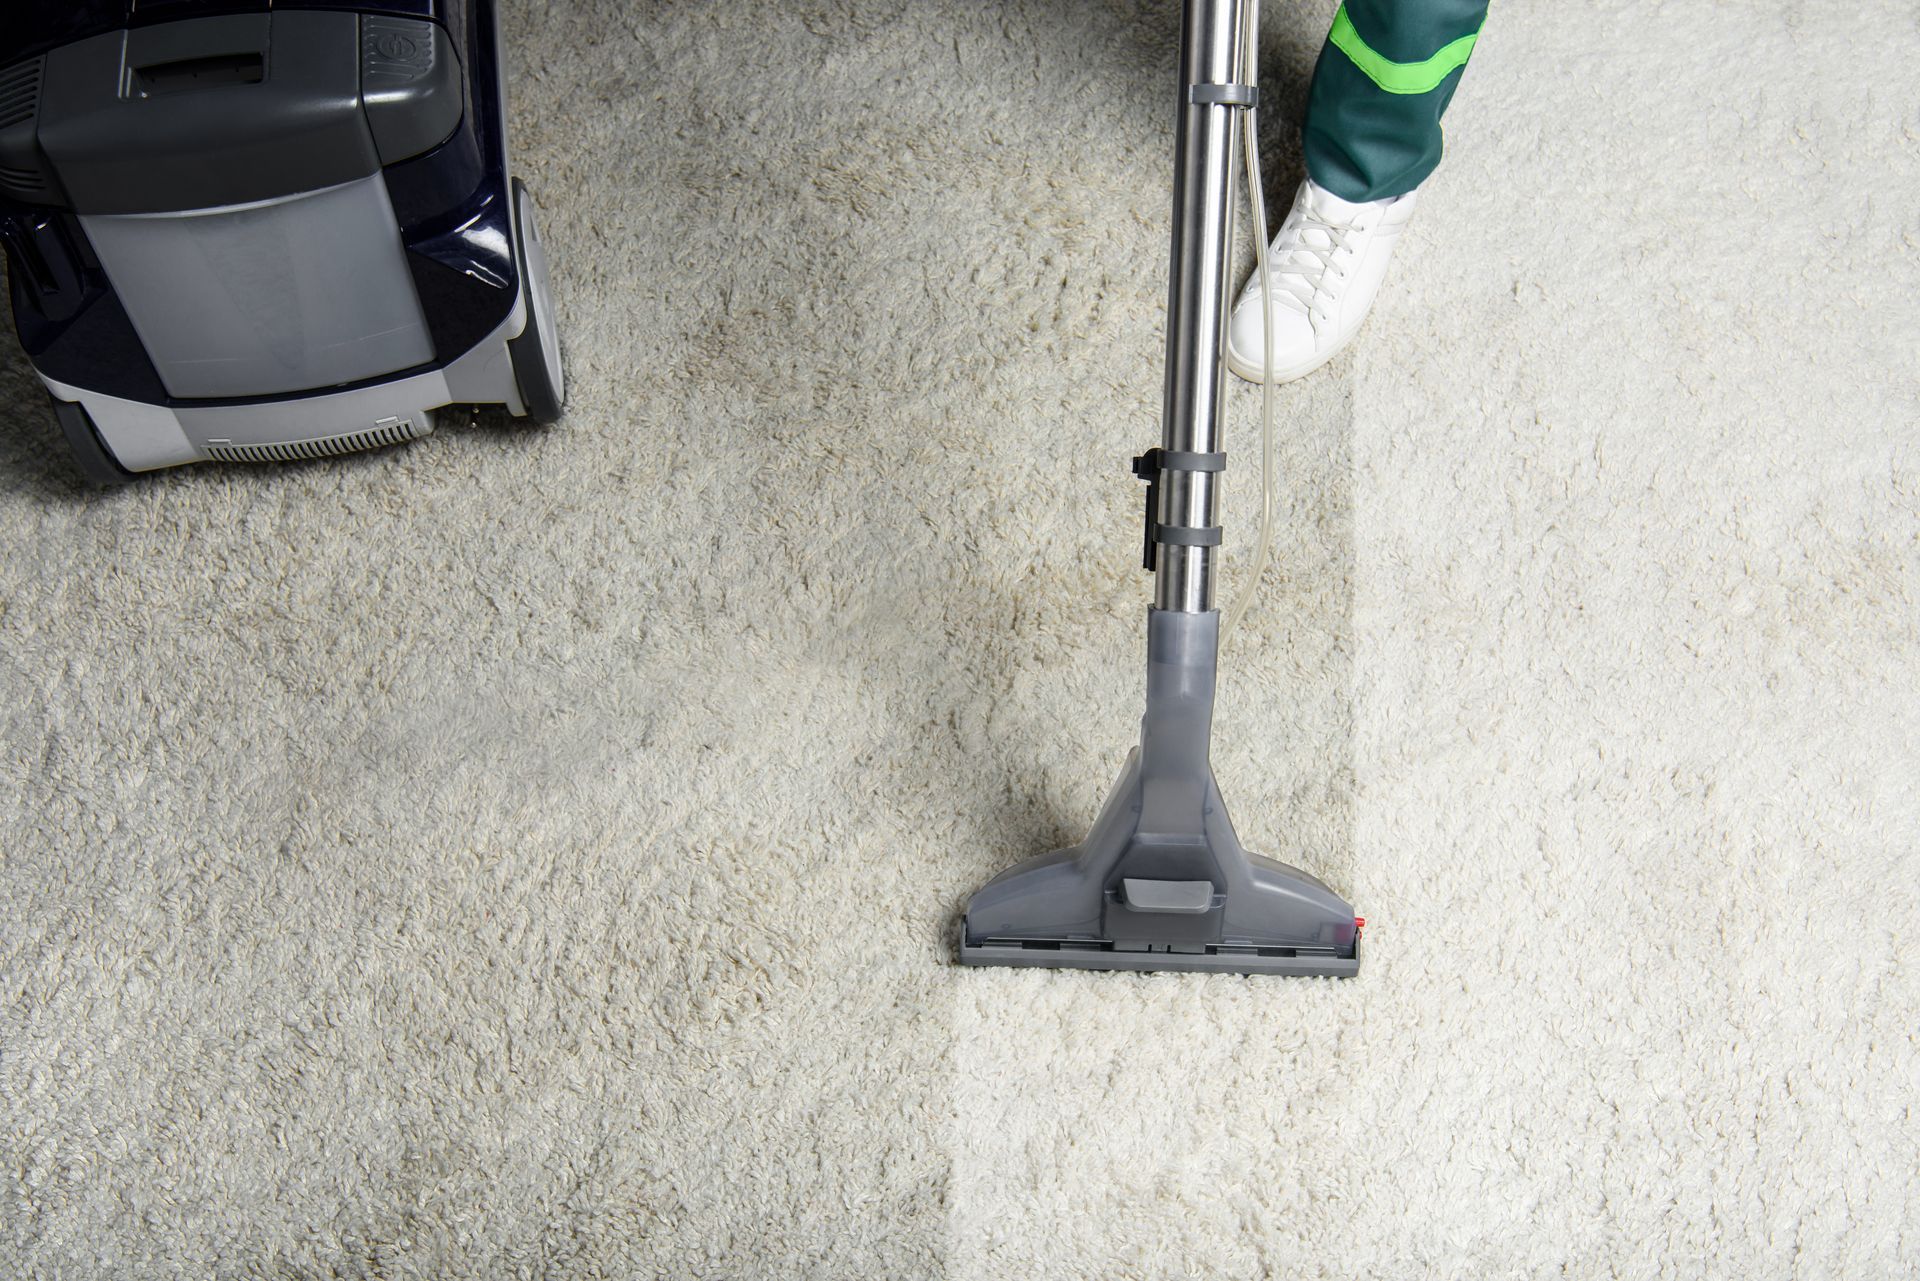 Person professionally cleaning a white carpet with a high-angle view using a powerful vacuum cleaner, ensuring thorough cleanliness and removing debris effectively.